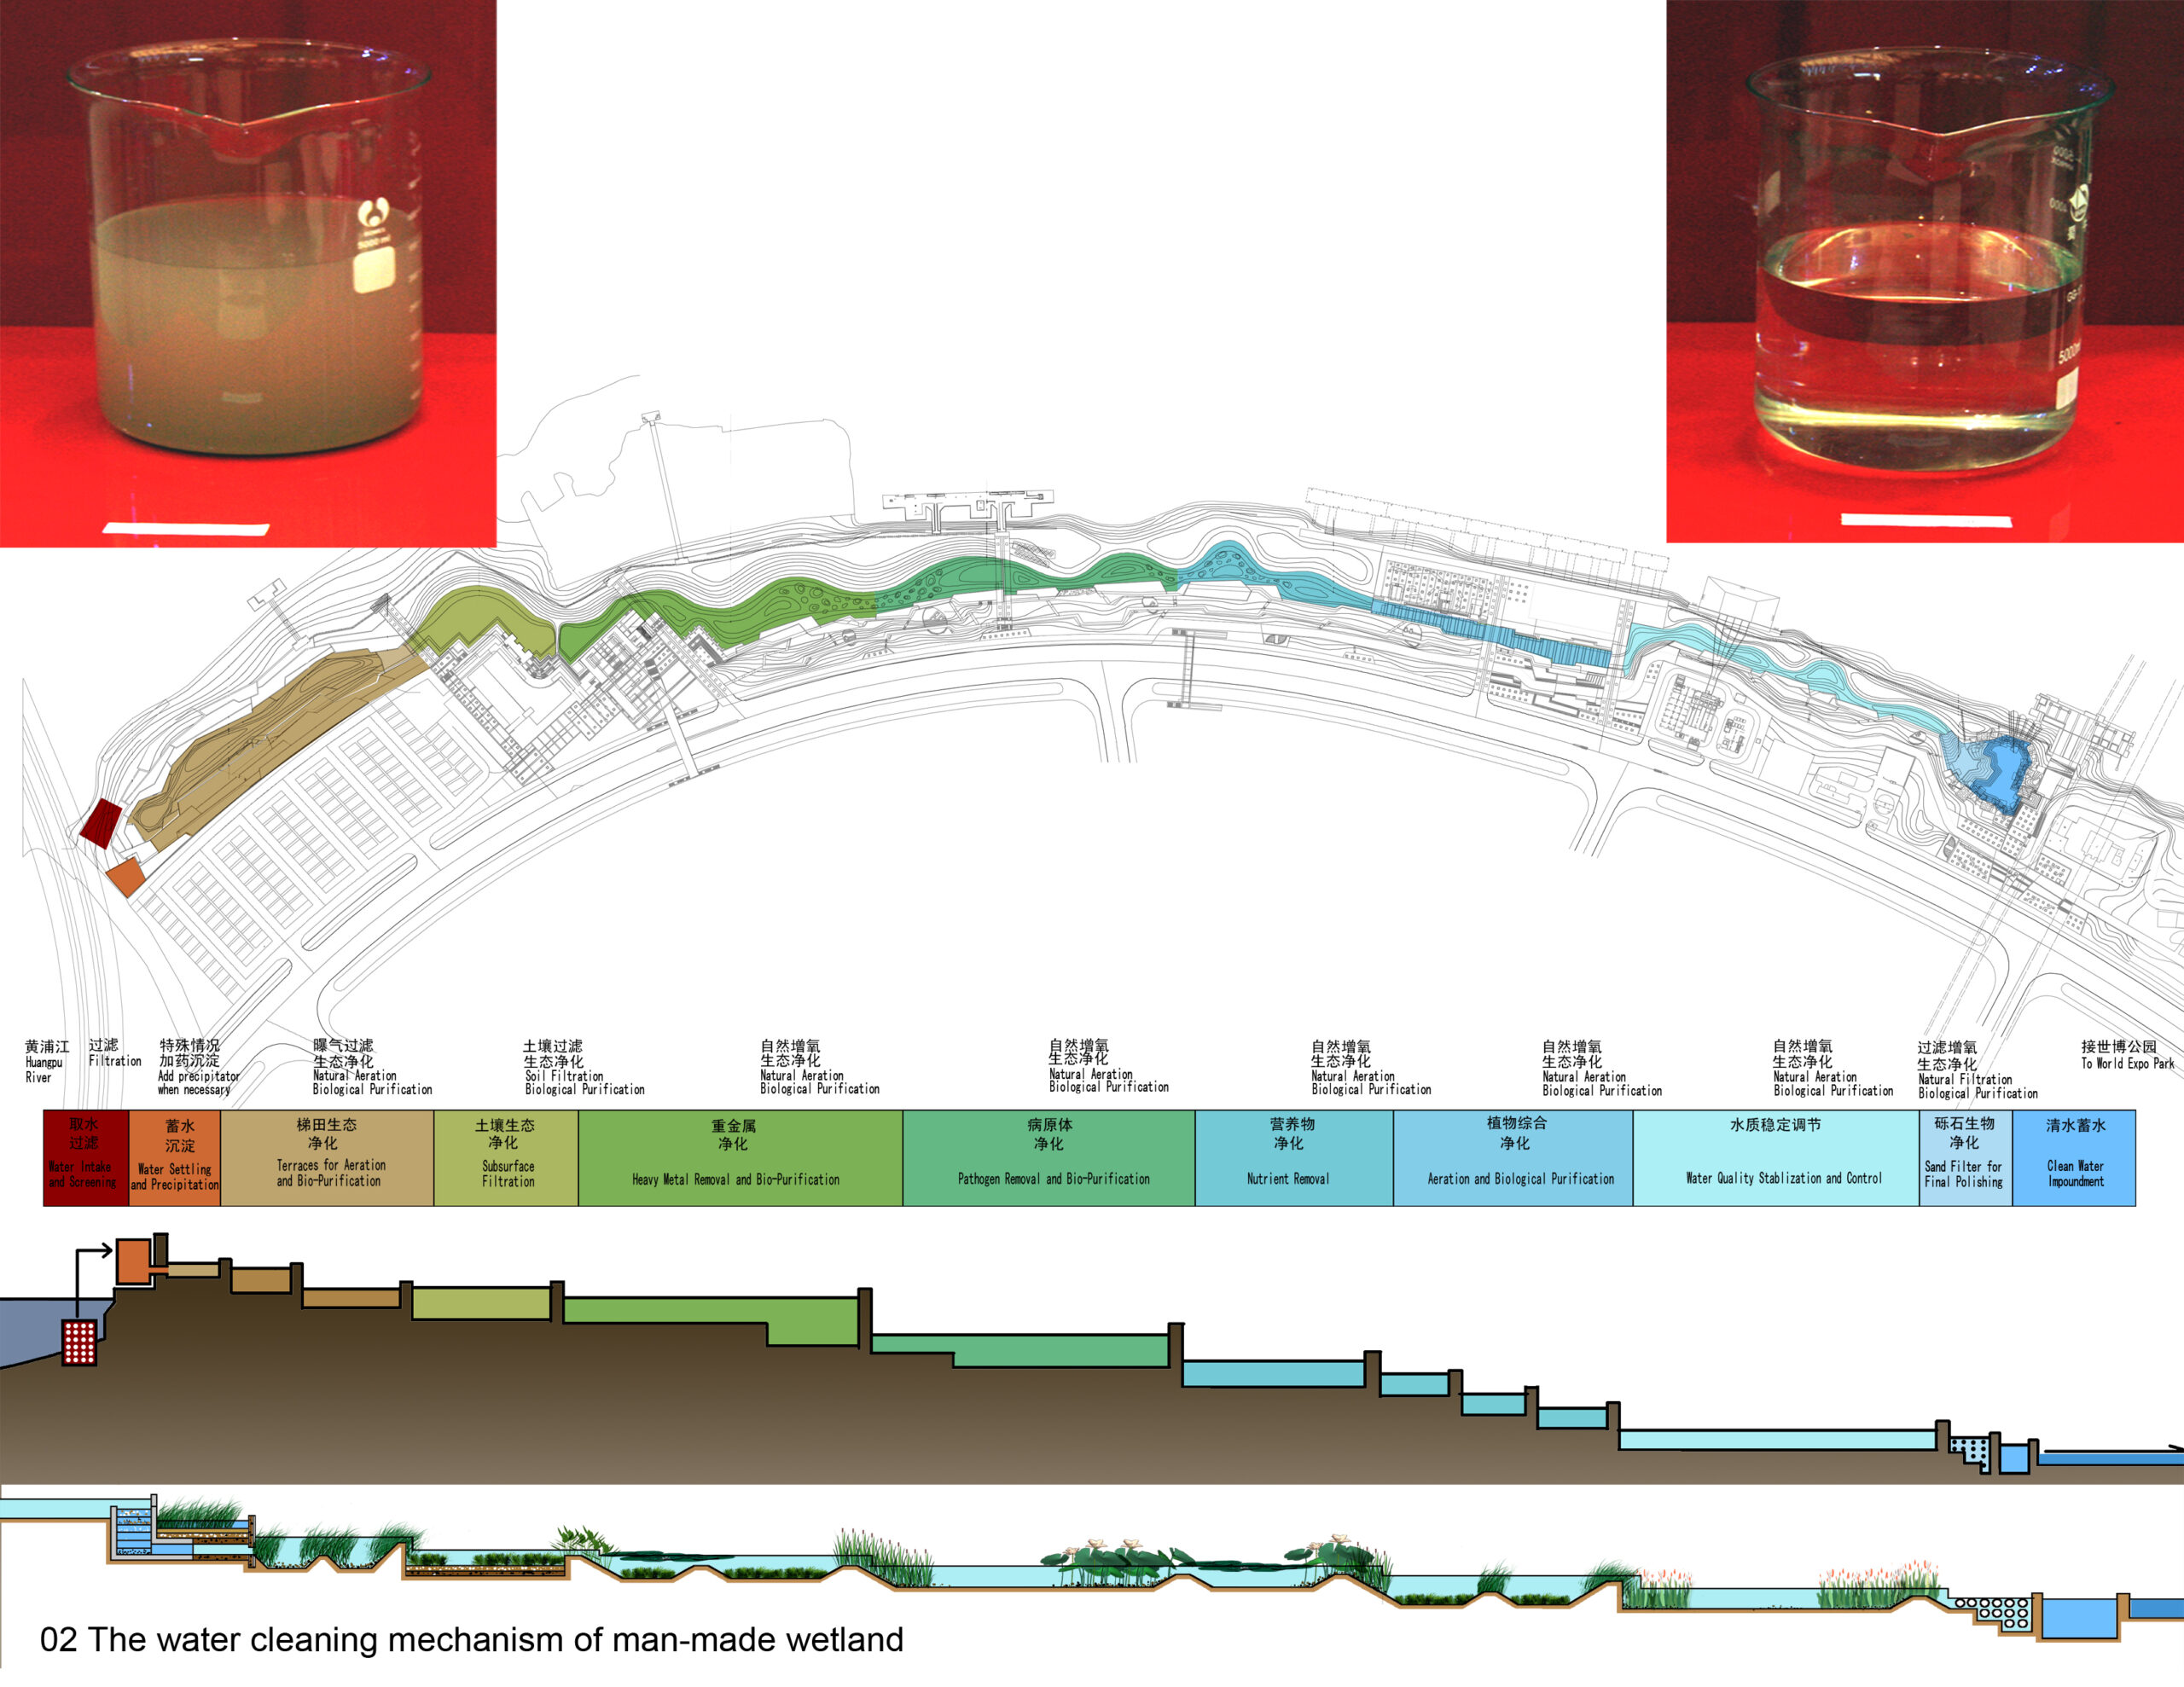 An illustration of how water is purified through wetland systems. Image by Turenscape and Kongjian Yu.